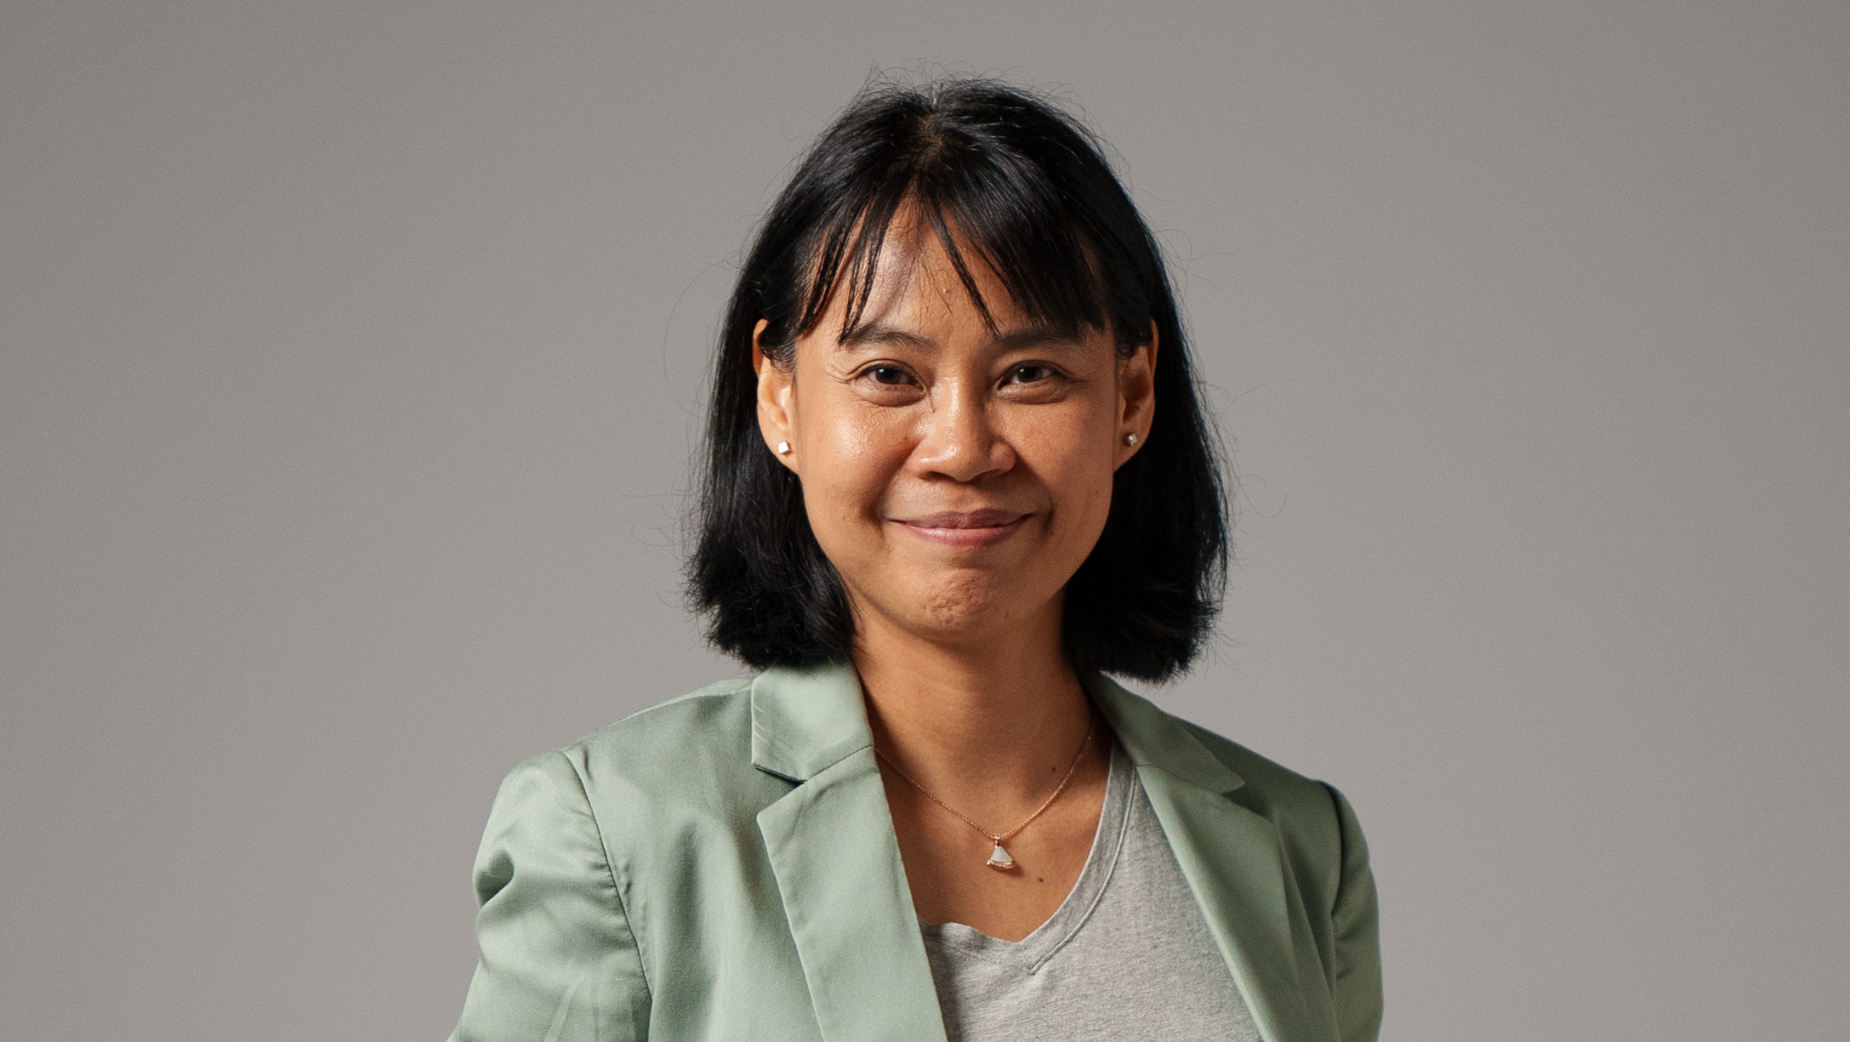 ‘VaynerMedia’s Expansion in Thailand Boosted by Appointment of Monchaya Koolawong as Country Manager’